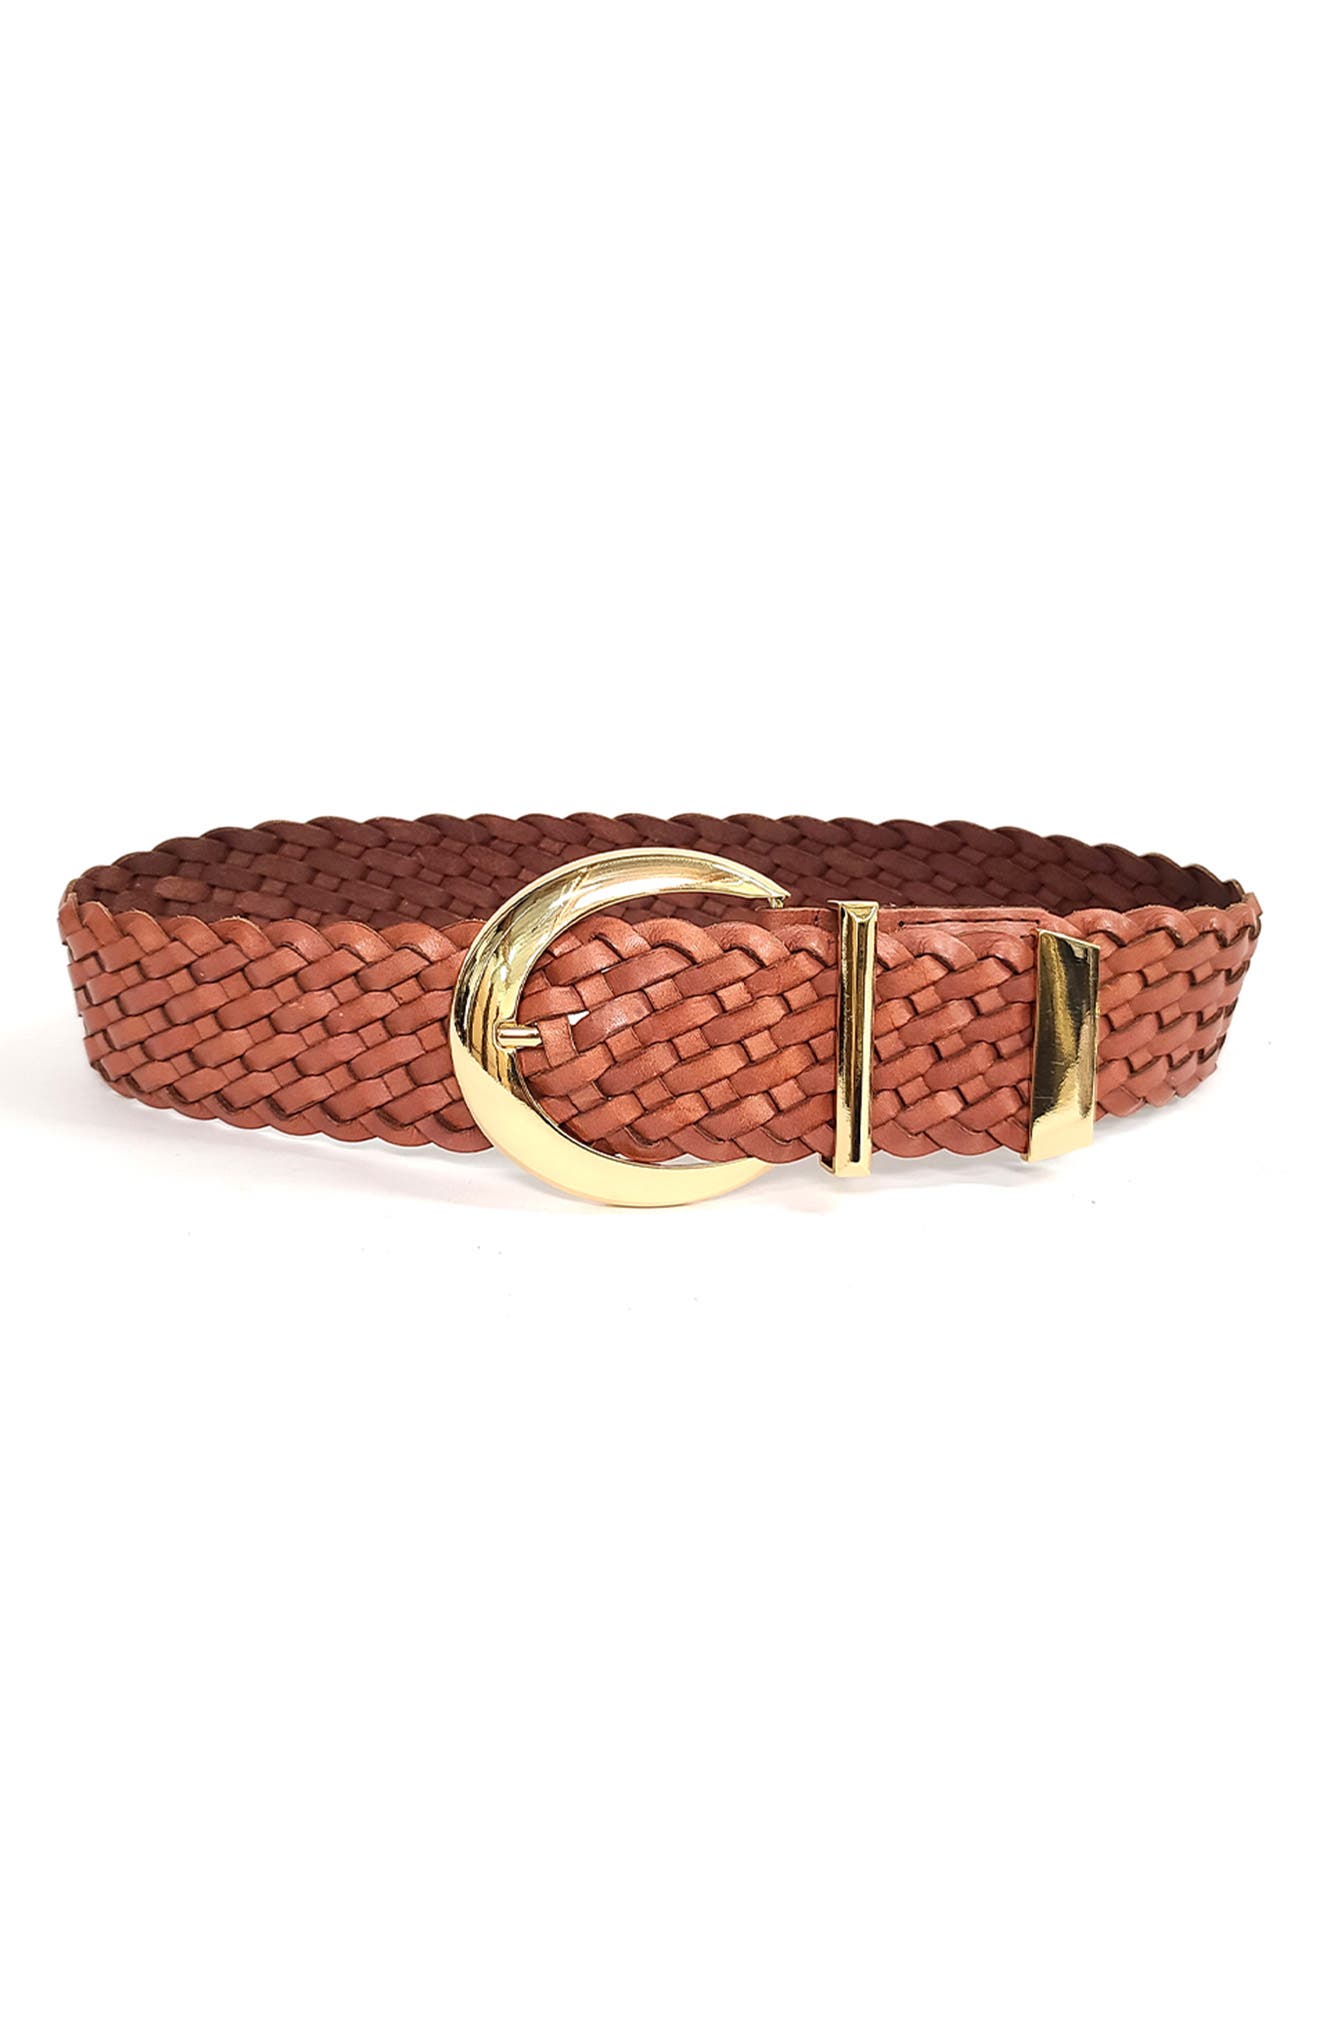 Witty Weaved Leather Belt Extra Large 42" Brown